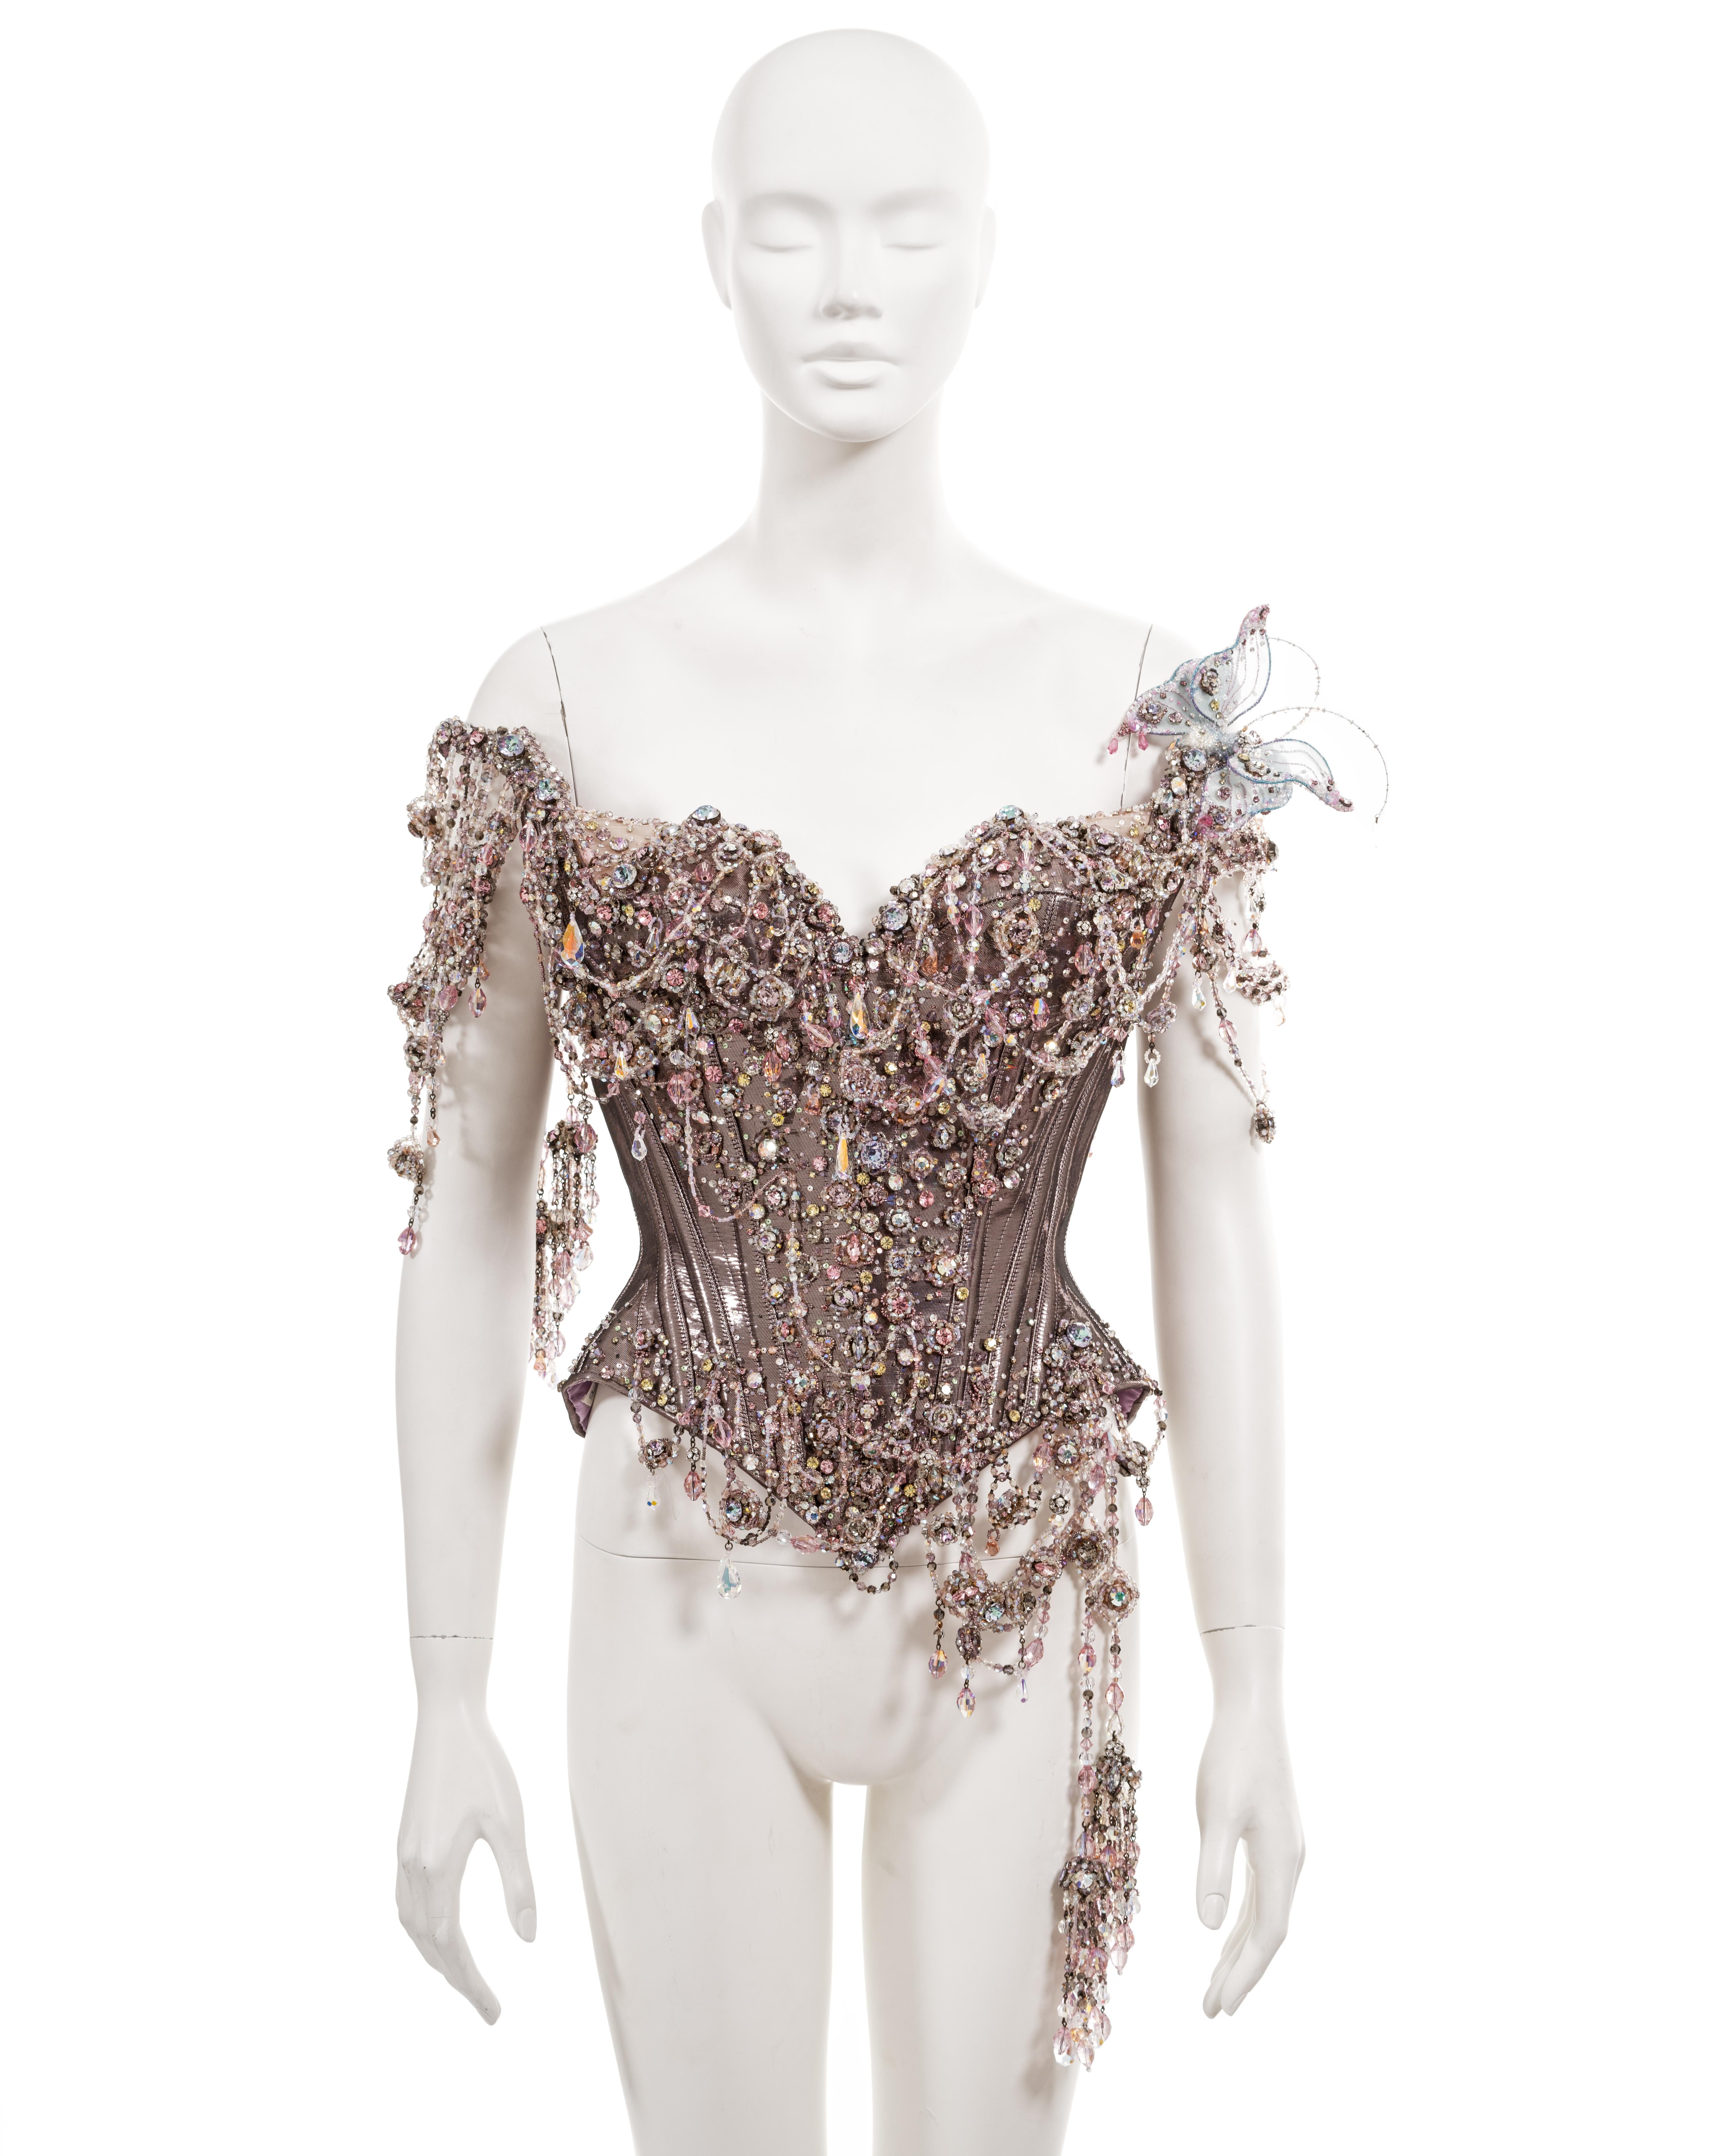 ▪ Archival Christian Lacroix Mr. Pearl Corset 
▪ Haute Couture, Spring-Summer 1996, Look #53
▪ Sold by One of a Kind Archive
▪ Museum Grade 

Introducing the Archival Christian Lacroix Corset, a remarkable piece of fashion history hailing from the